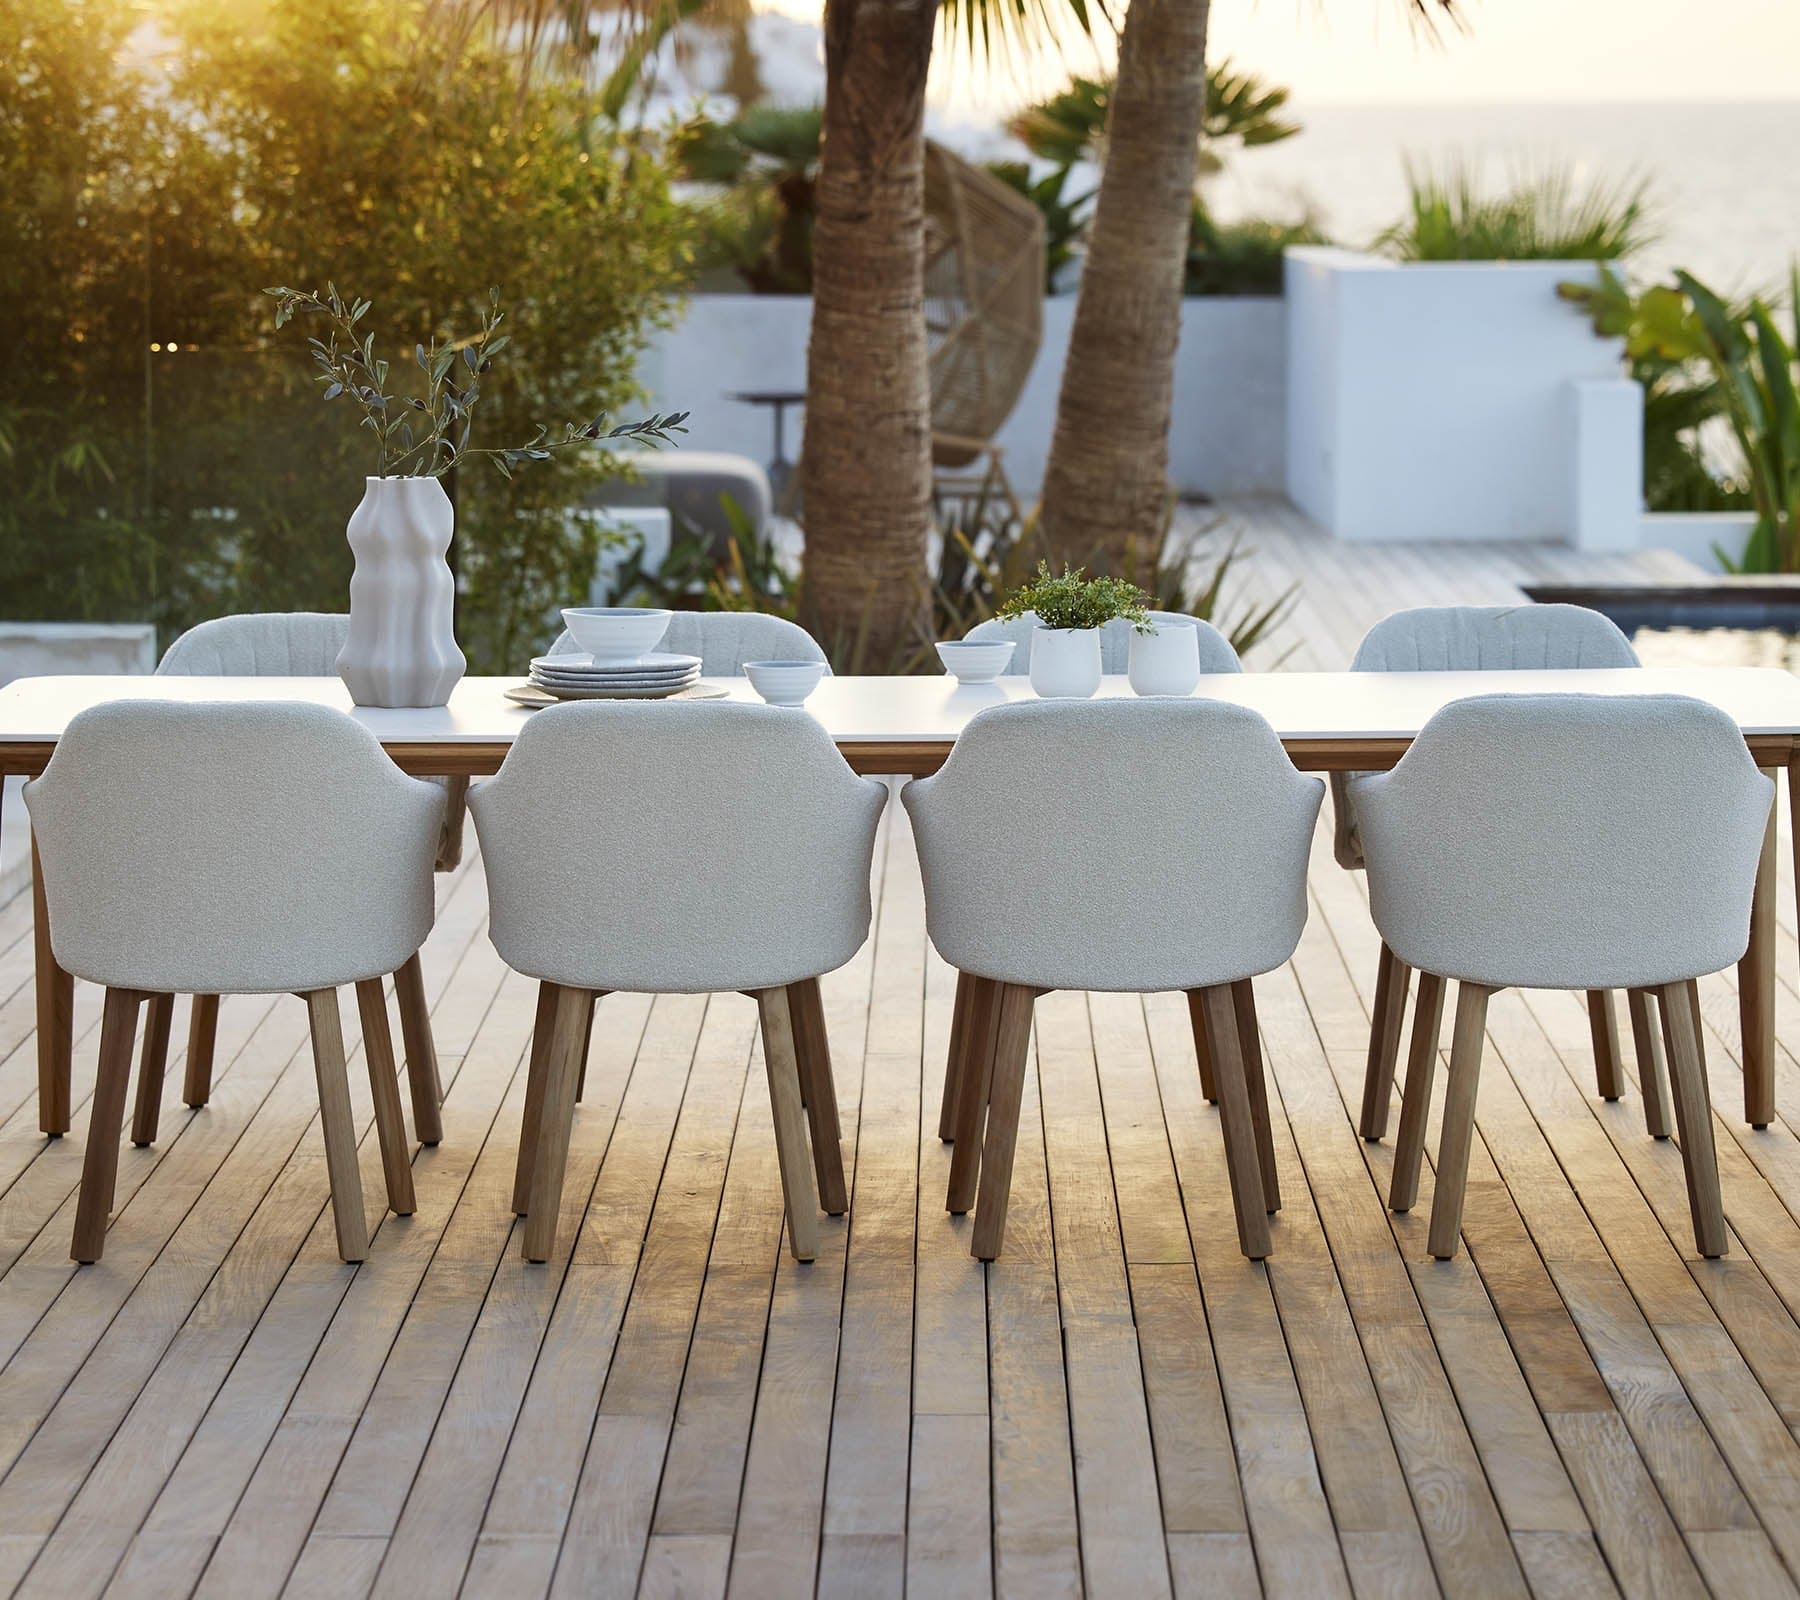 Boxhill's Choice Outdoor Dining Chair Teak Legs lifestyle image with Aspect Dining Table on wooden platform